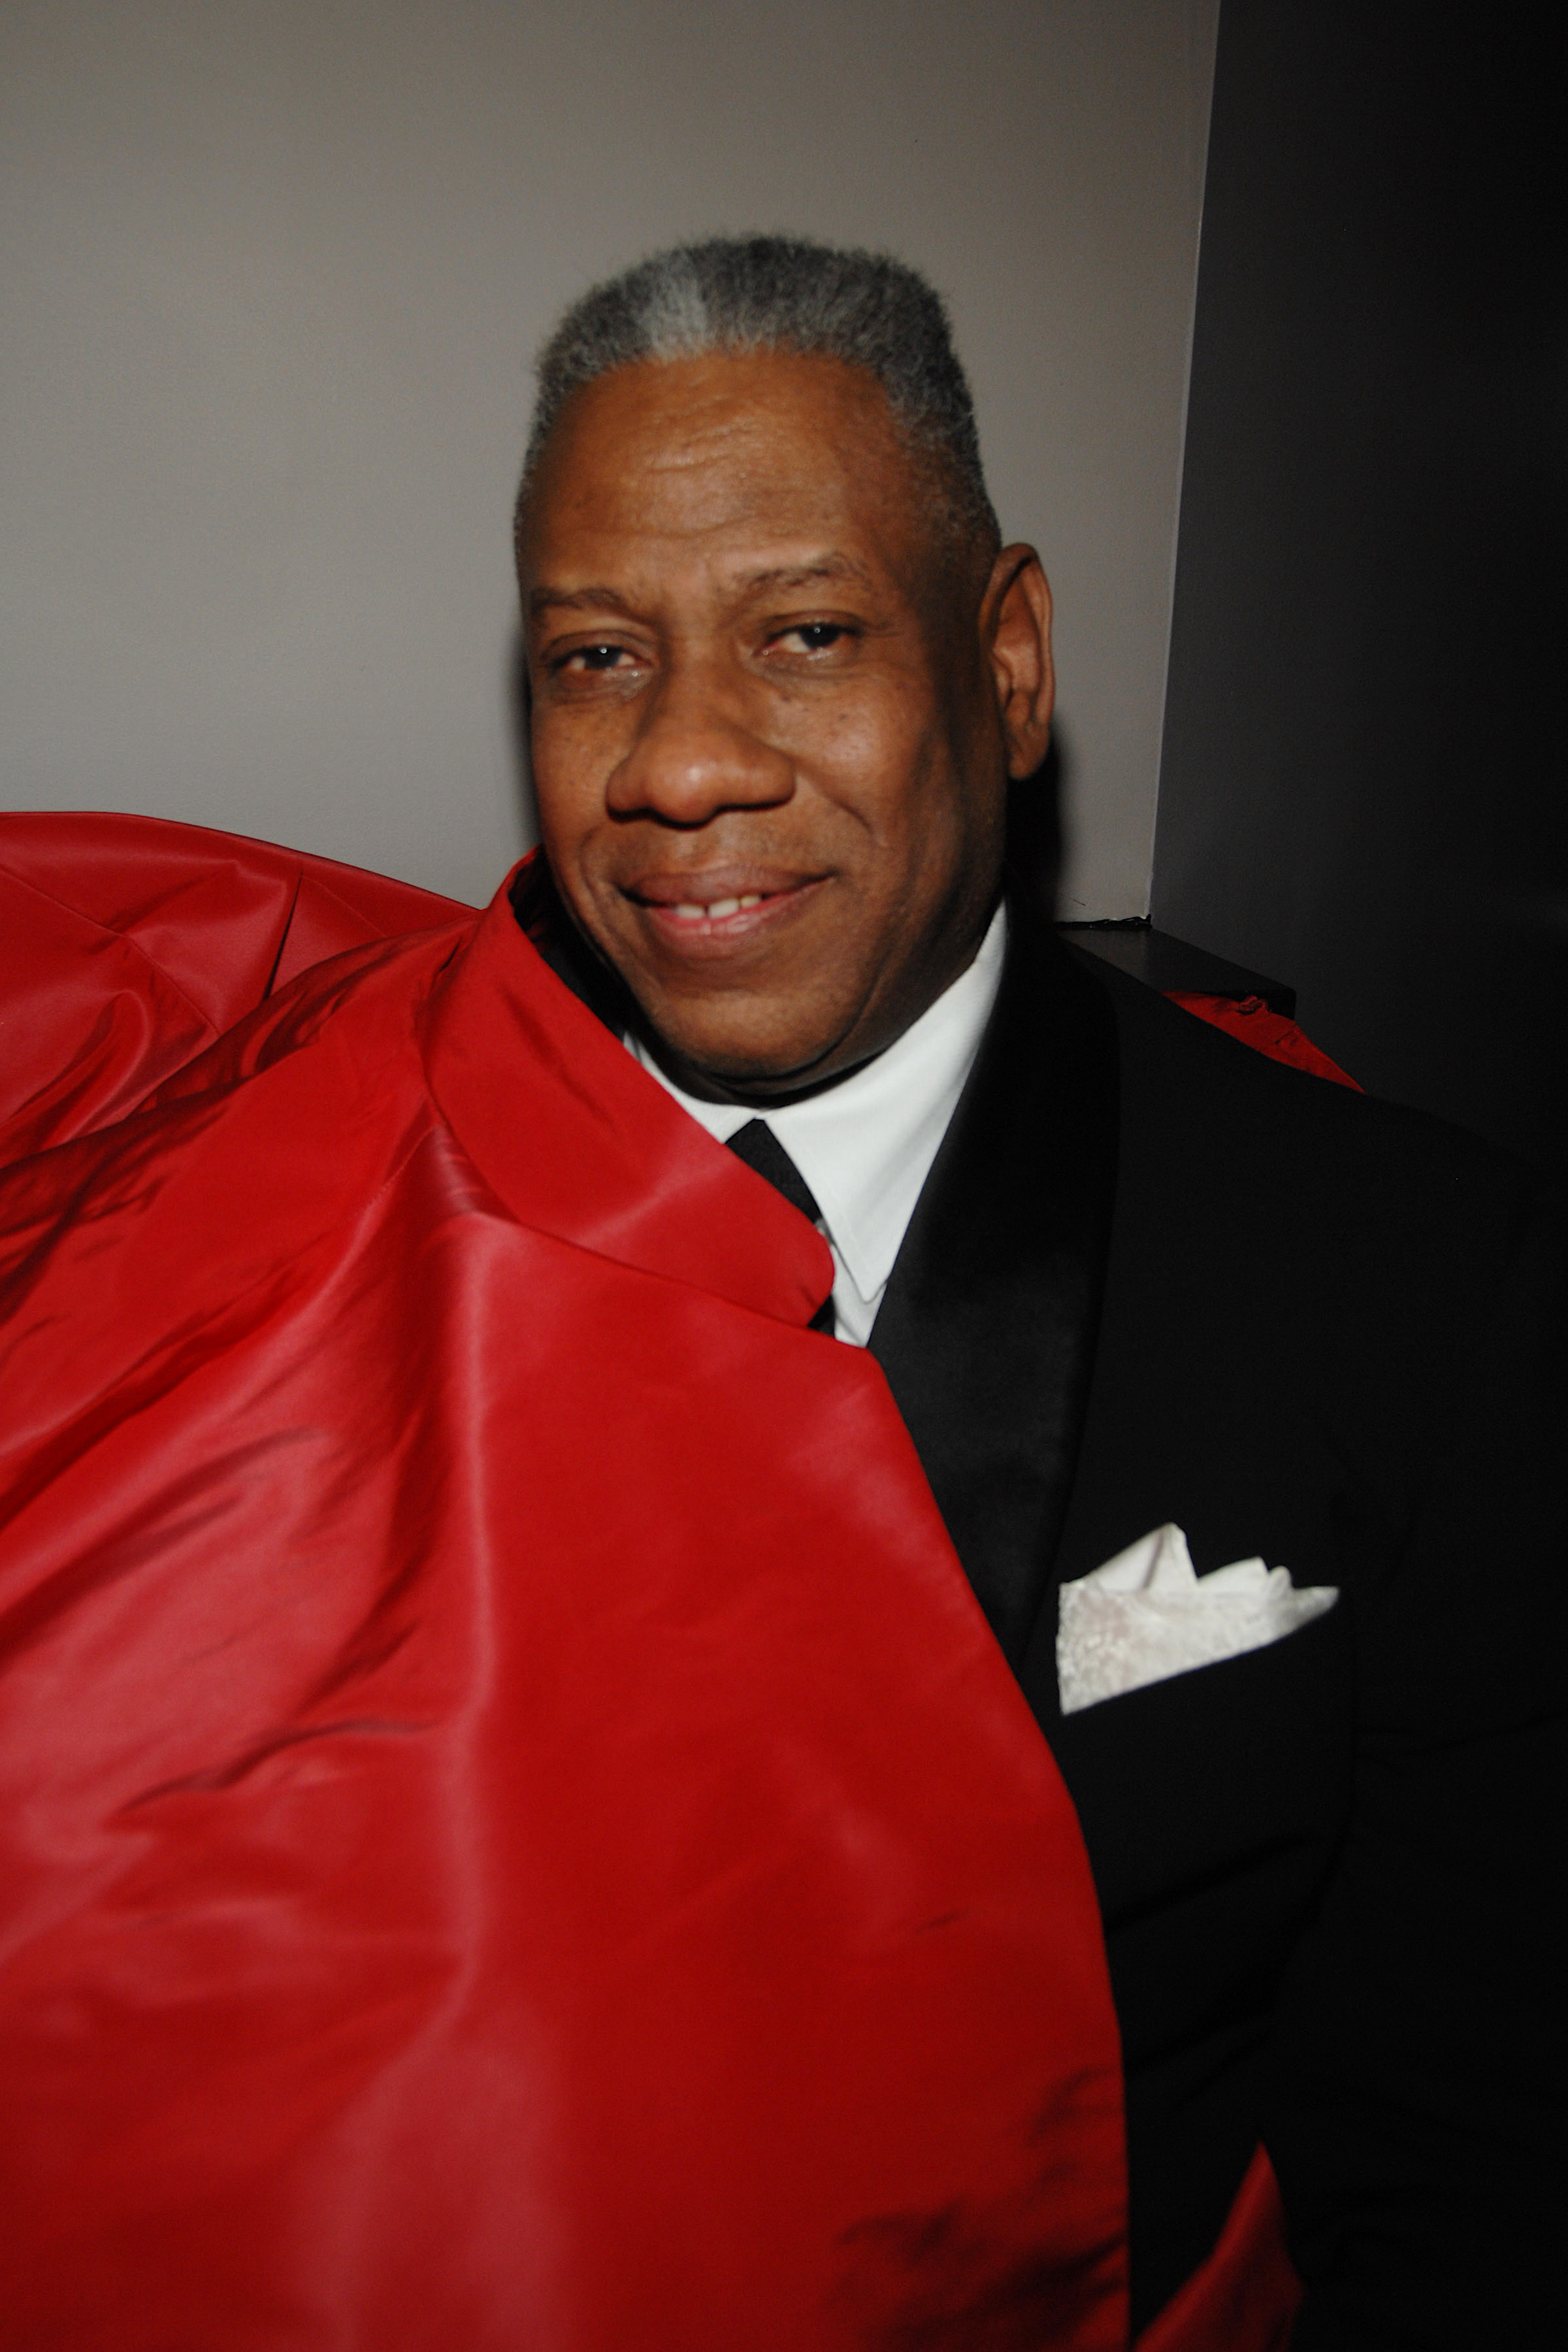 André Leon Talley attends a party following the May 5, 2008 Met Gala in New York. (David Prutting—Patrick McMullan/Getty Images)